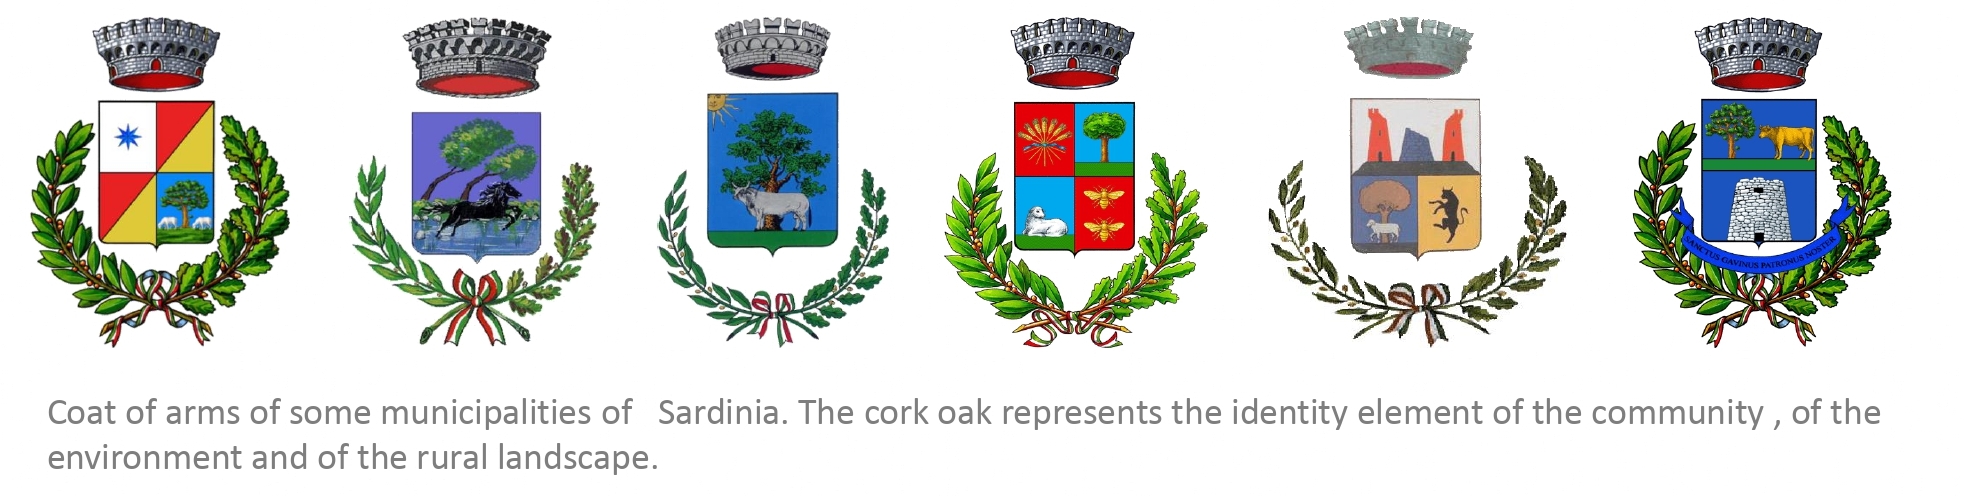 Coat of arms of some municipalities of Sardinia. The cork oak represents the identity element of the community, the environment and the rural landscape.